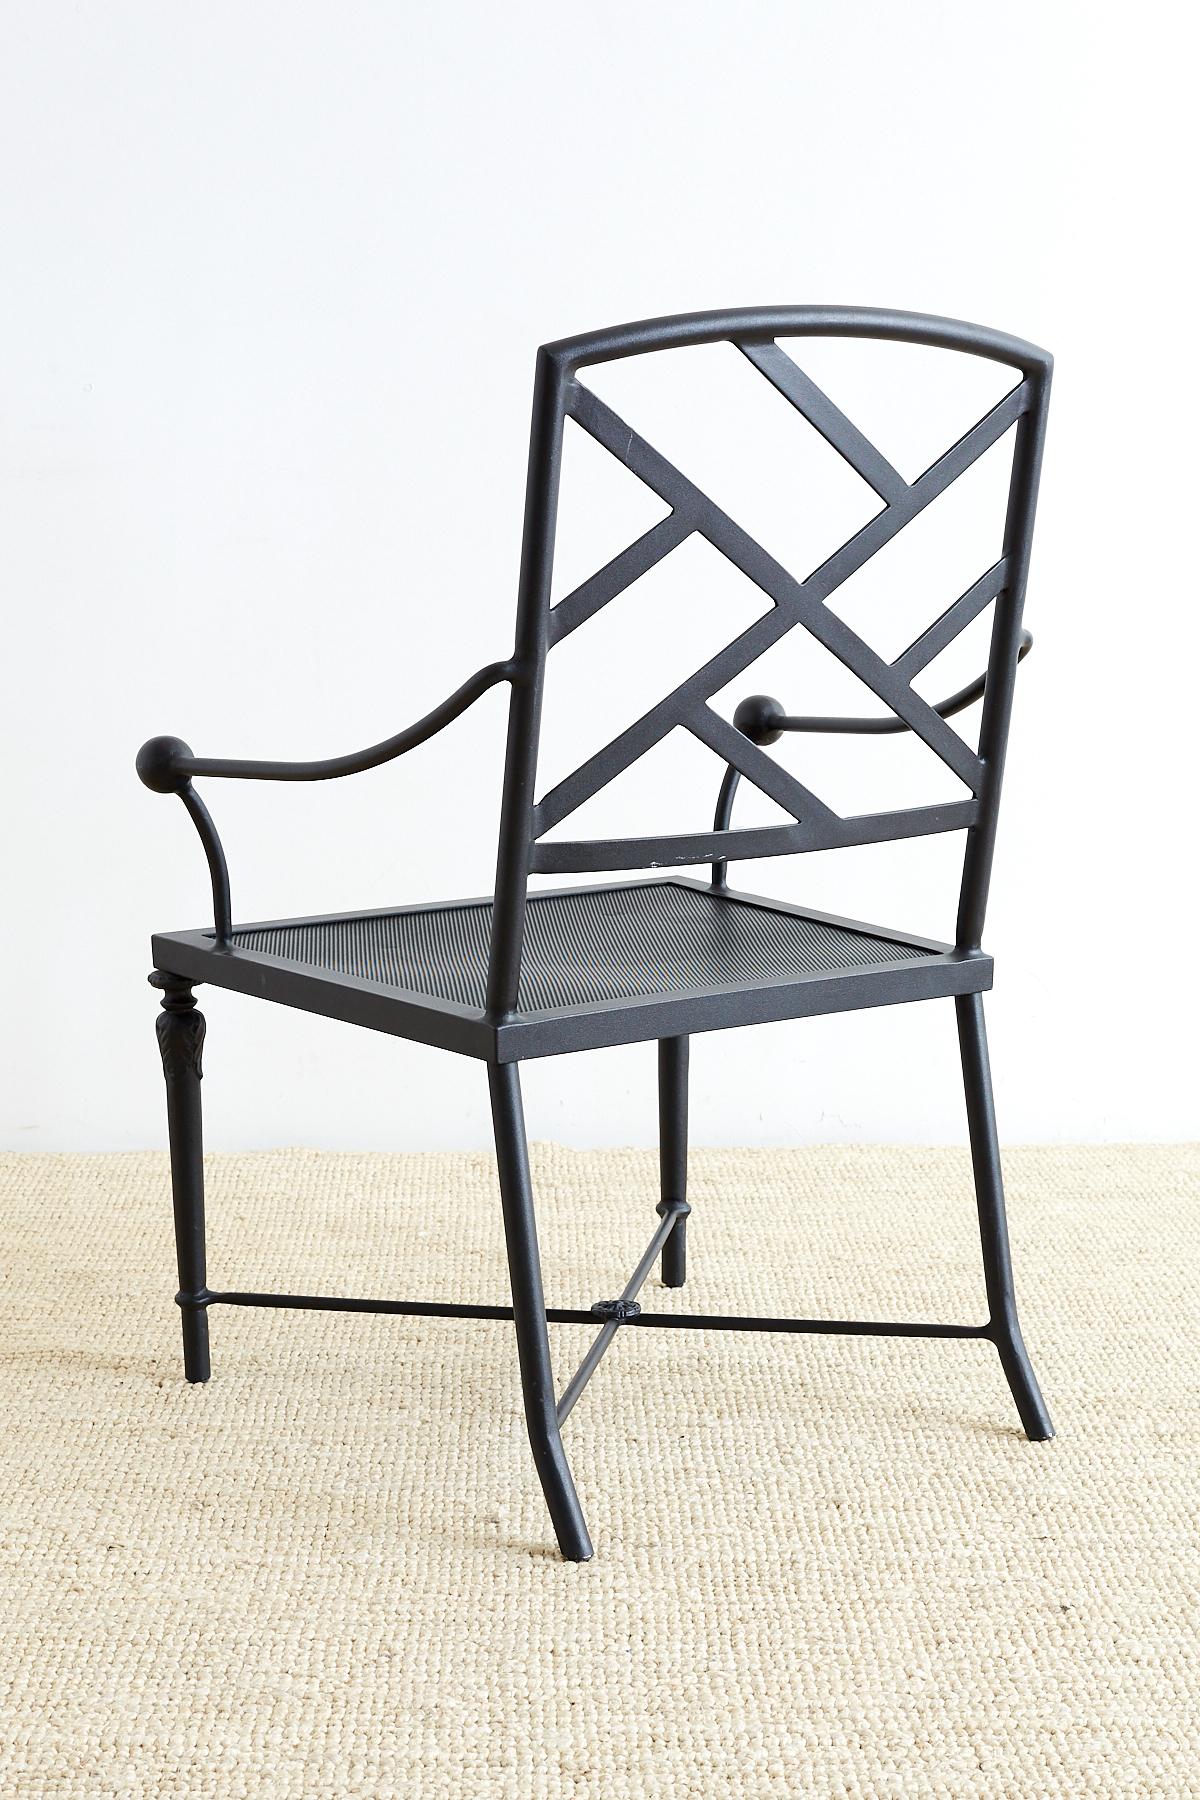 20th Century Set of Four Powder Coated Aluminum Garden Chairs